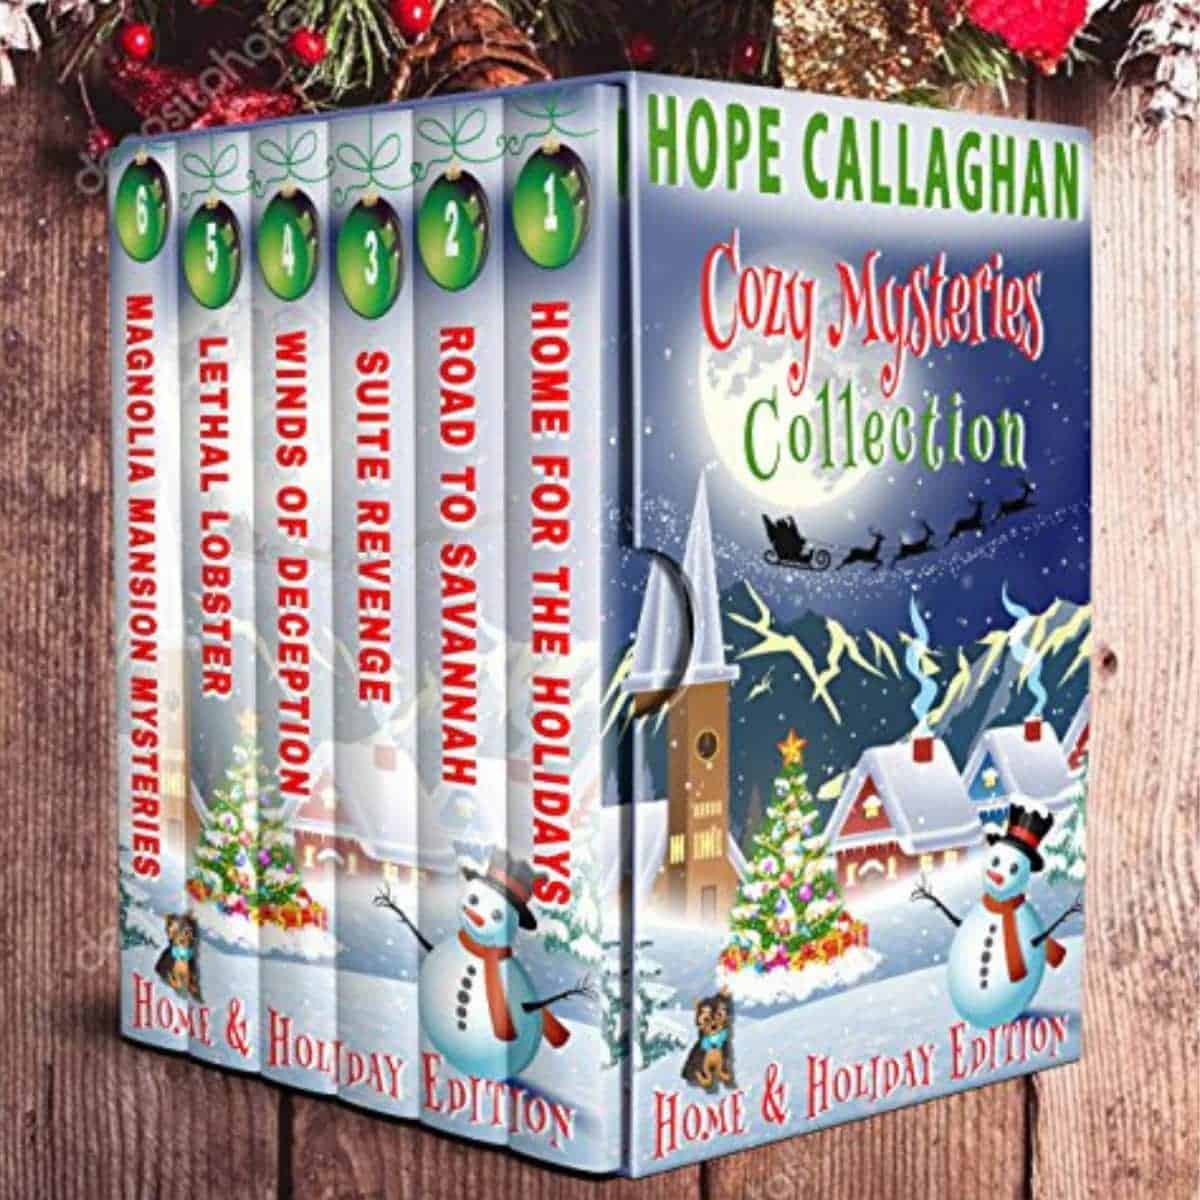 Mystery-Loving Brother: Cozy Mysteries Collection by Hope Callaghan | Top Kindle Books of 2018 | Gift Ideas For Each Member of the Family